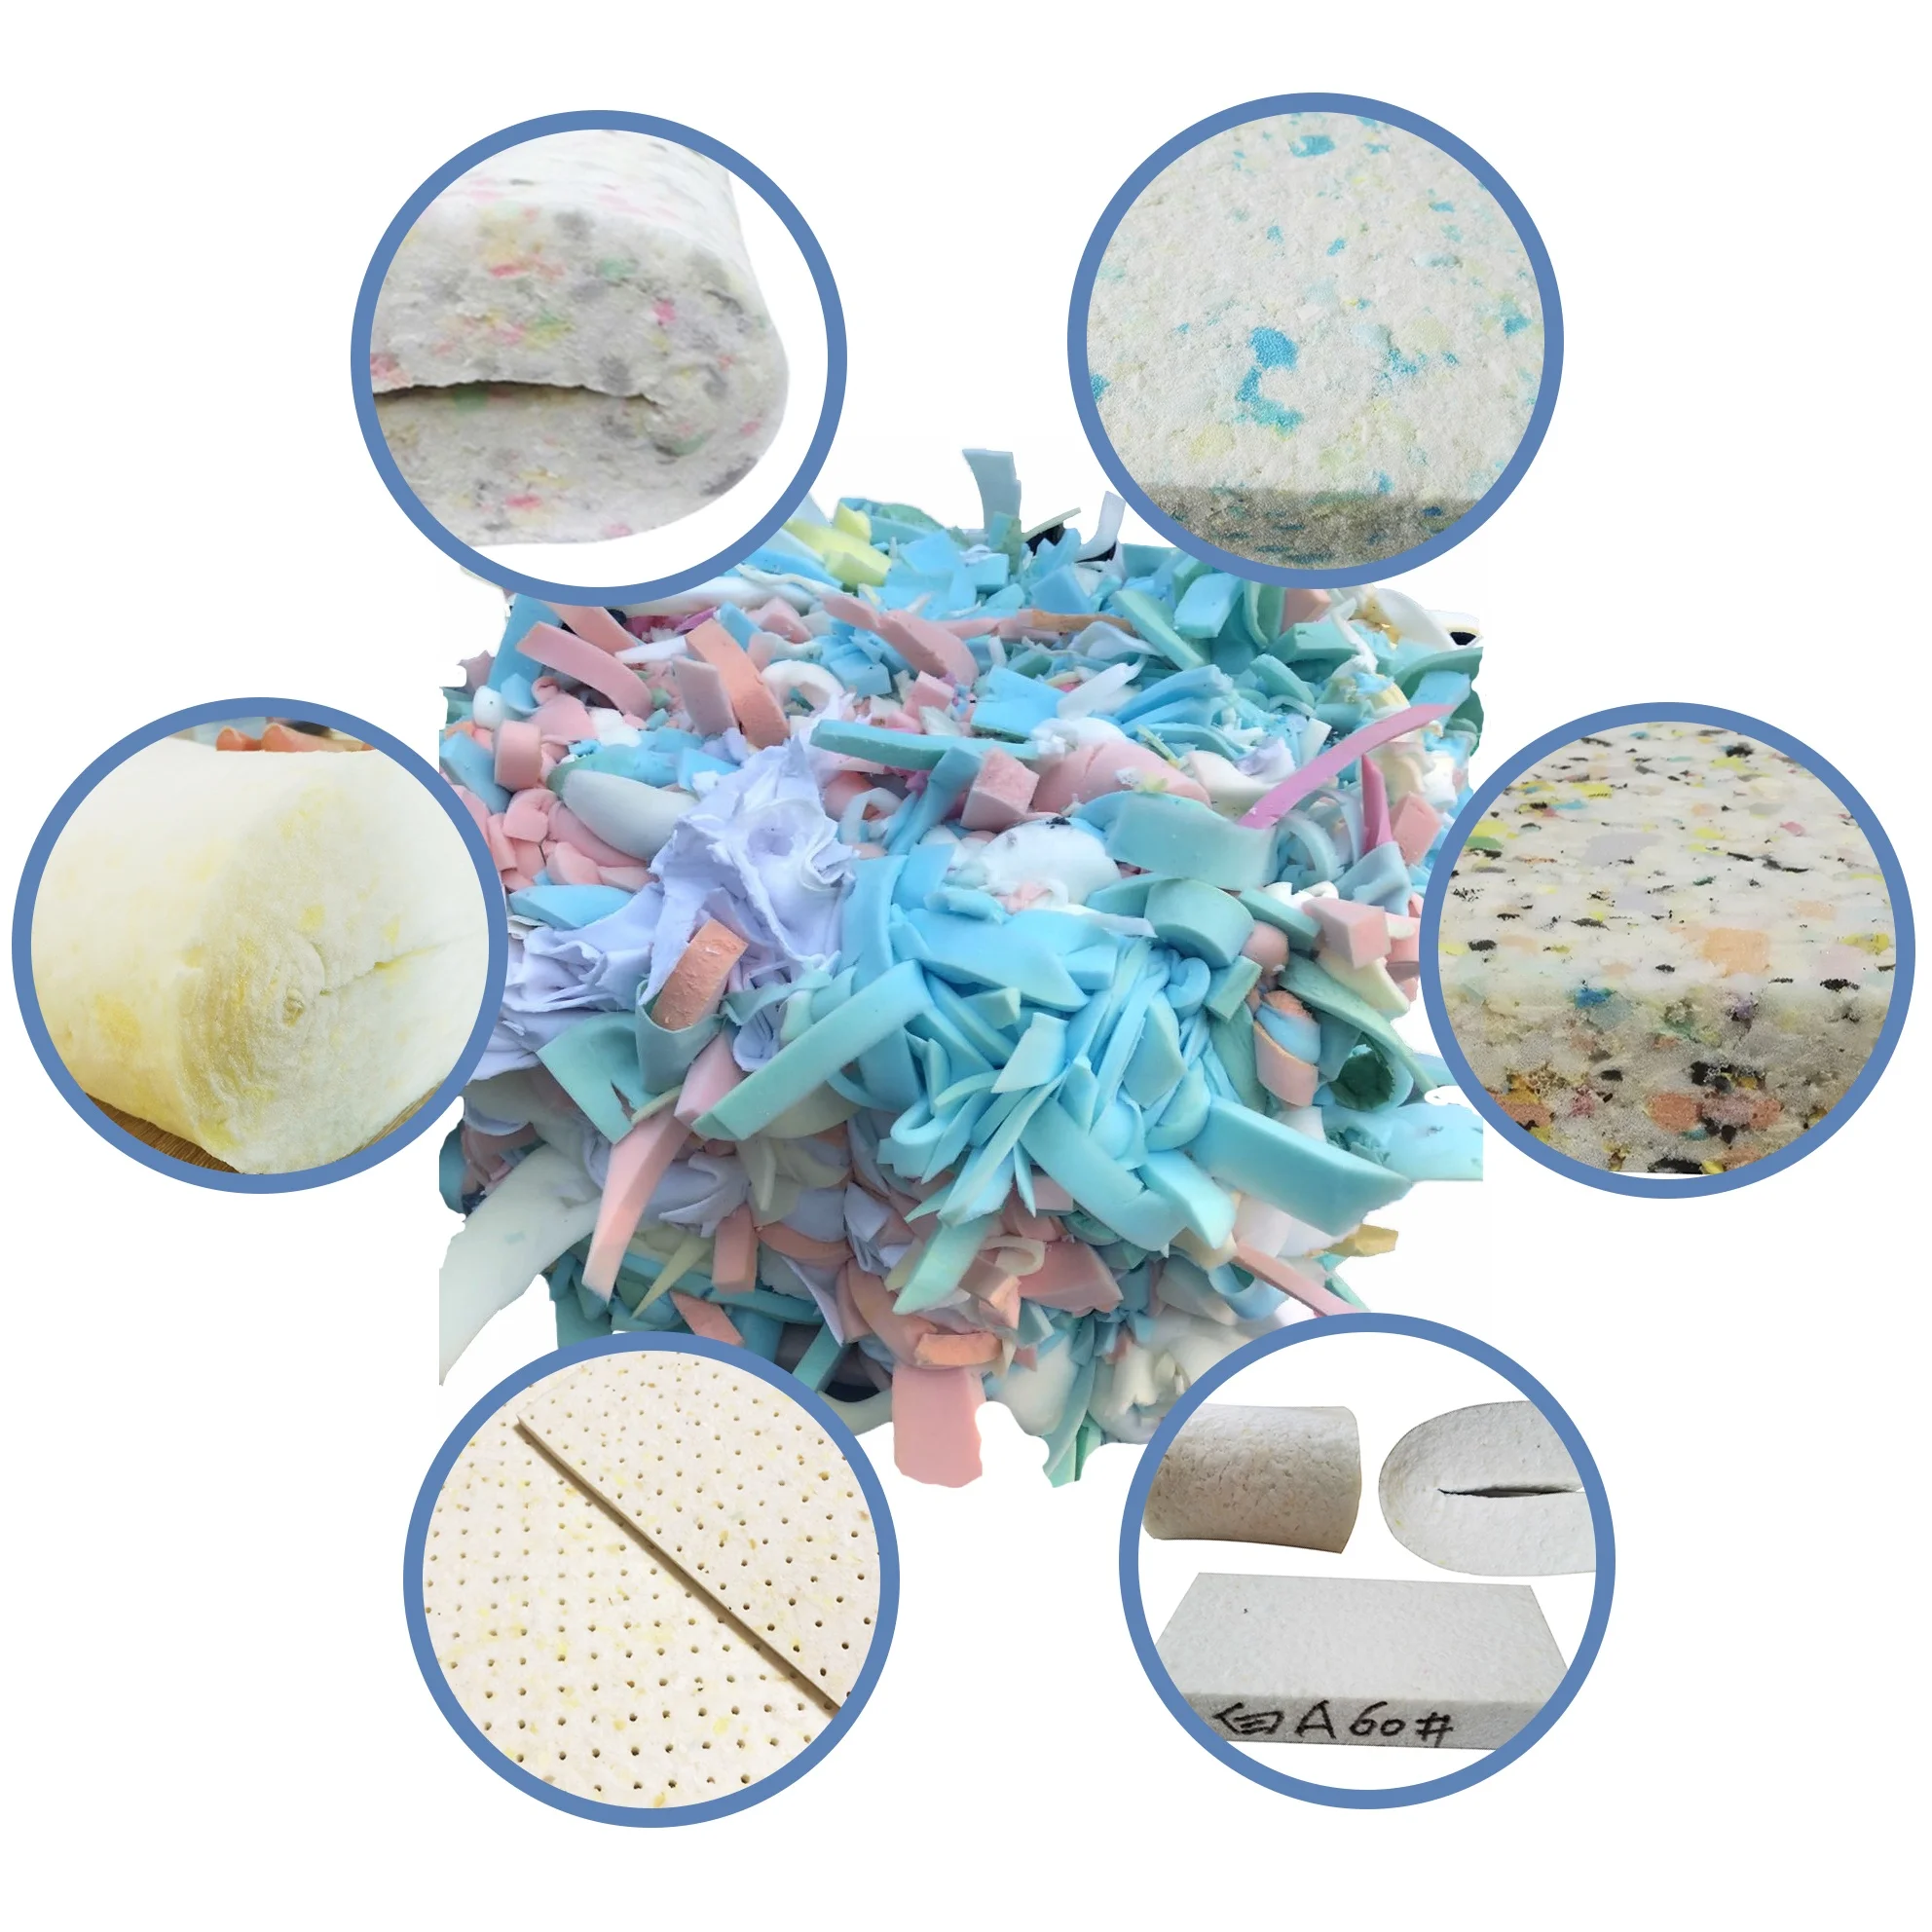 China waste PU foam scraps foam trimming with good quality use for making rebonded foam